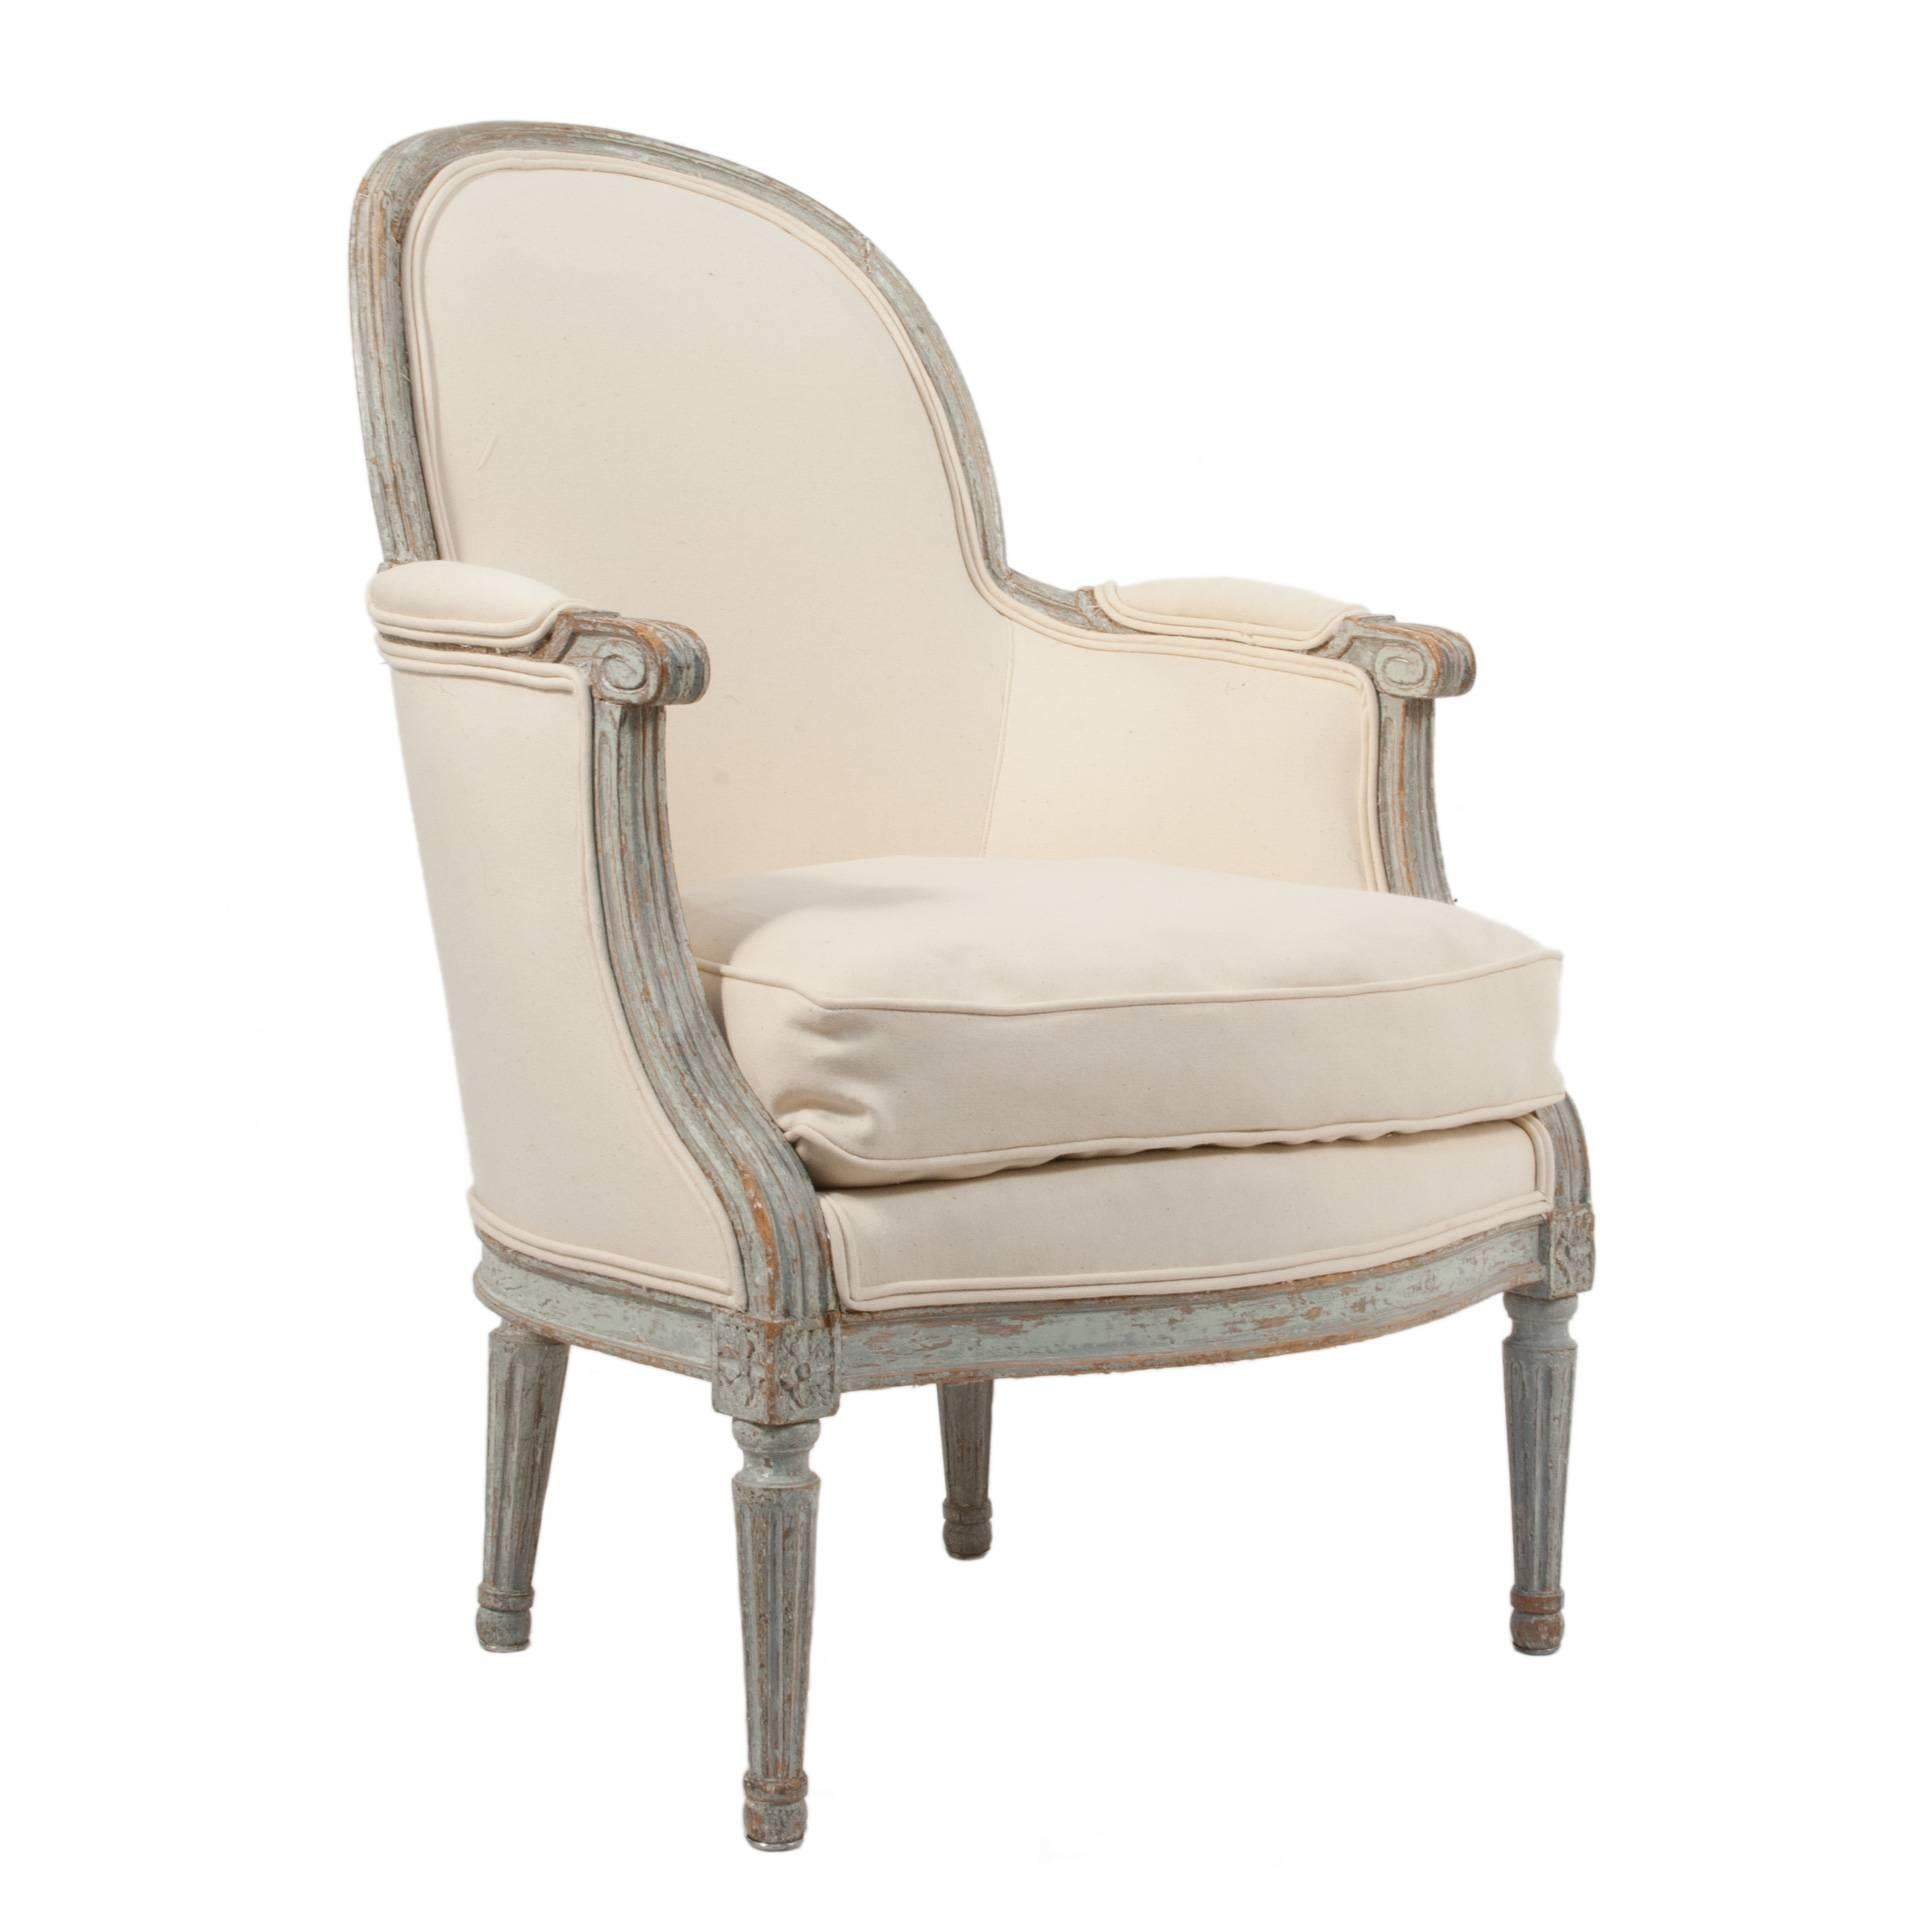 Pair of Gustavian Bergeres chairs in a worn pale blue patina.